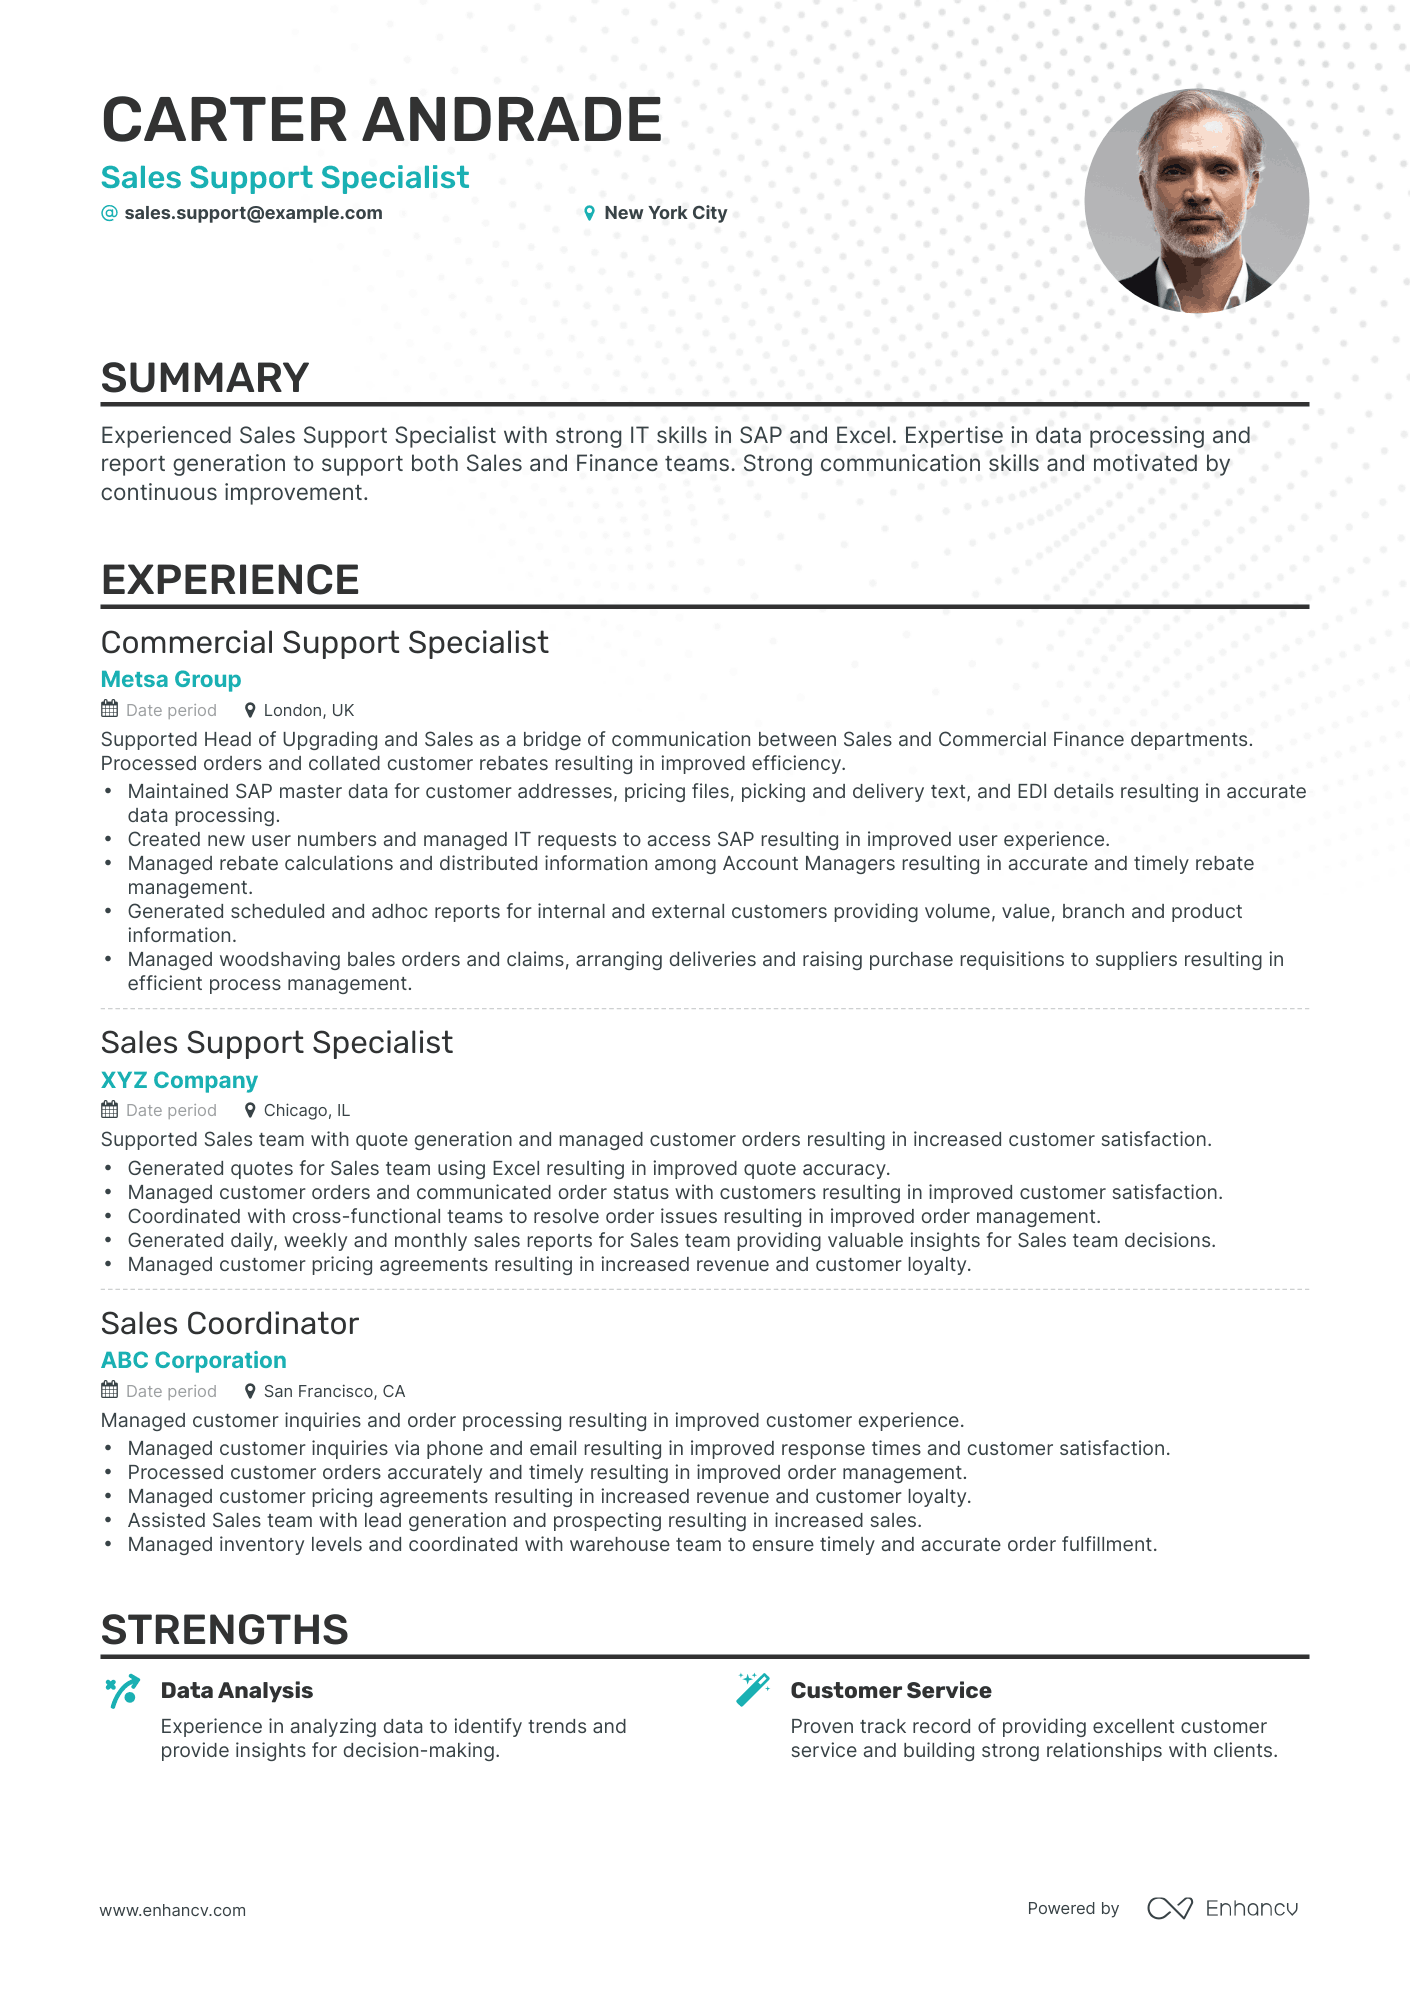 Classic Sales Support Specialist Resume Template